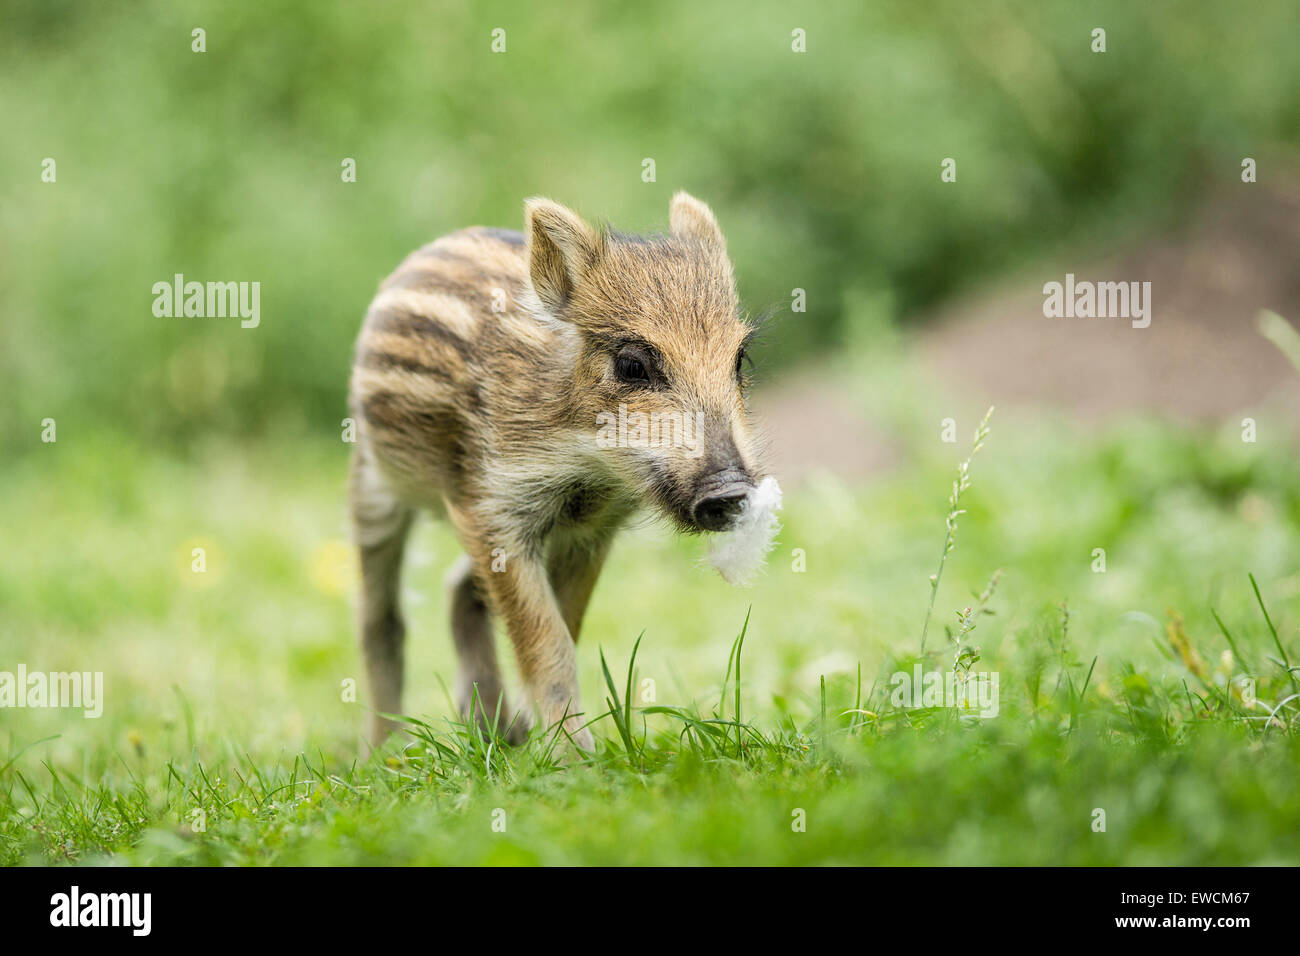 Wild Boar (Sus scrofa). Piglet walking, with a feather on its nose. Germany Stock Photo